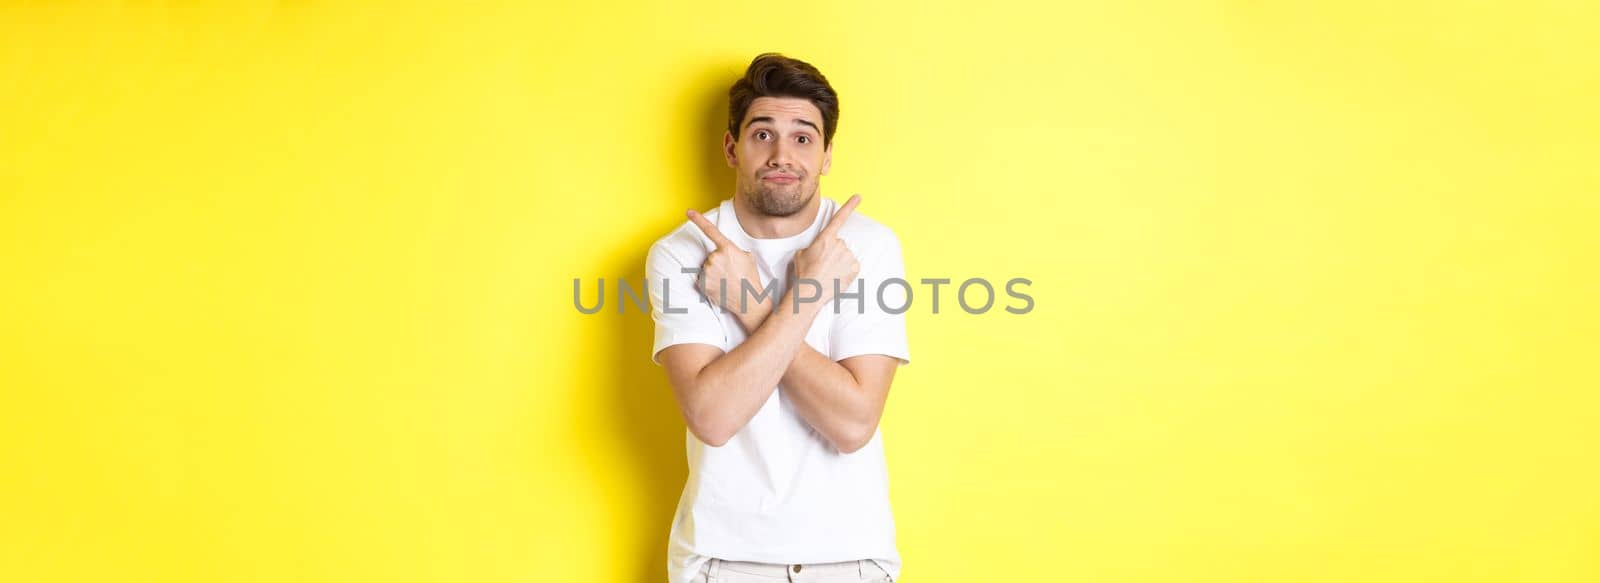 Indecisive man pointing fingers sideways, struggling to make decision, asking advice, standing over yellow background.